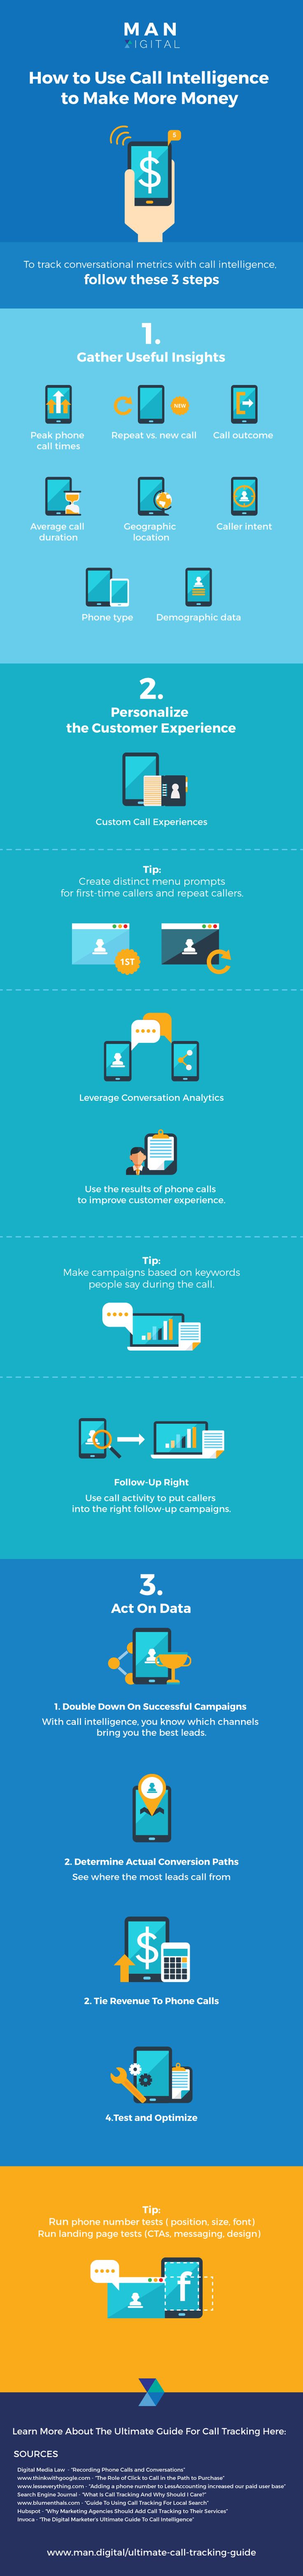 Advertising-Infographics-Call-Intelligence-Advanced-Call-Tracking-INFOGRAPHIC-Read-more-on-our-blog-MAN Advertising Infographics : Call Intelligence: Advanced Call Tracking INFOGRAPHIC Read more on our blog MAN ...